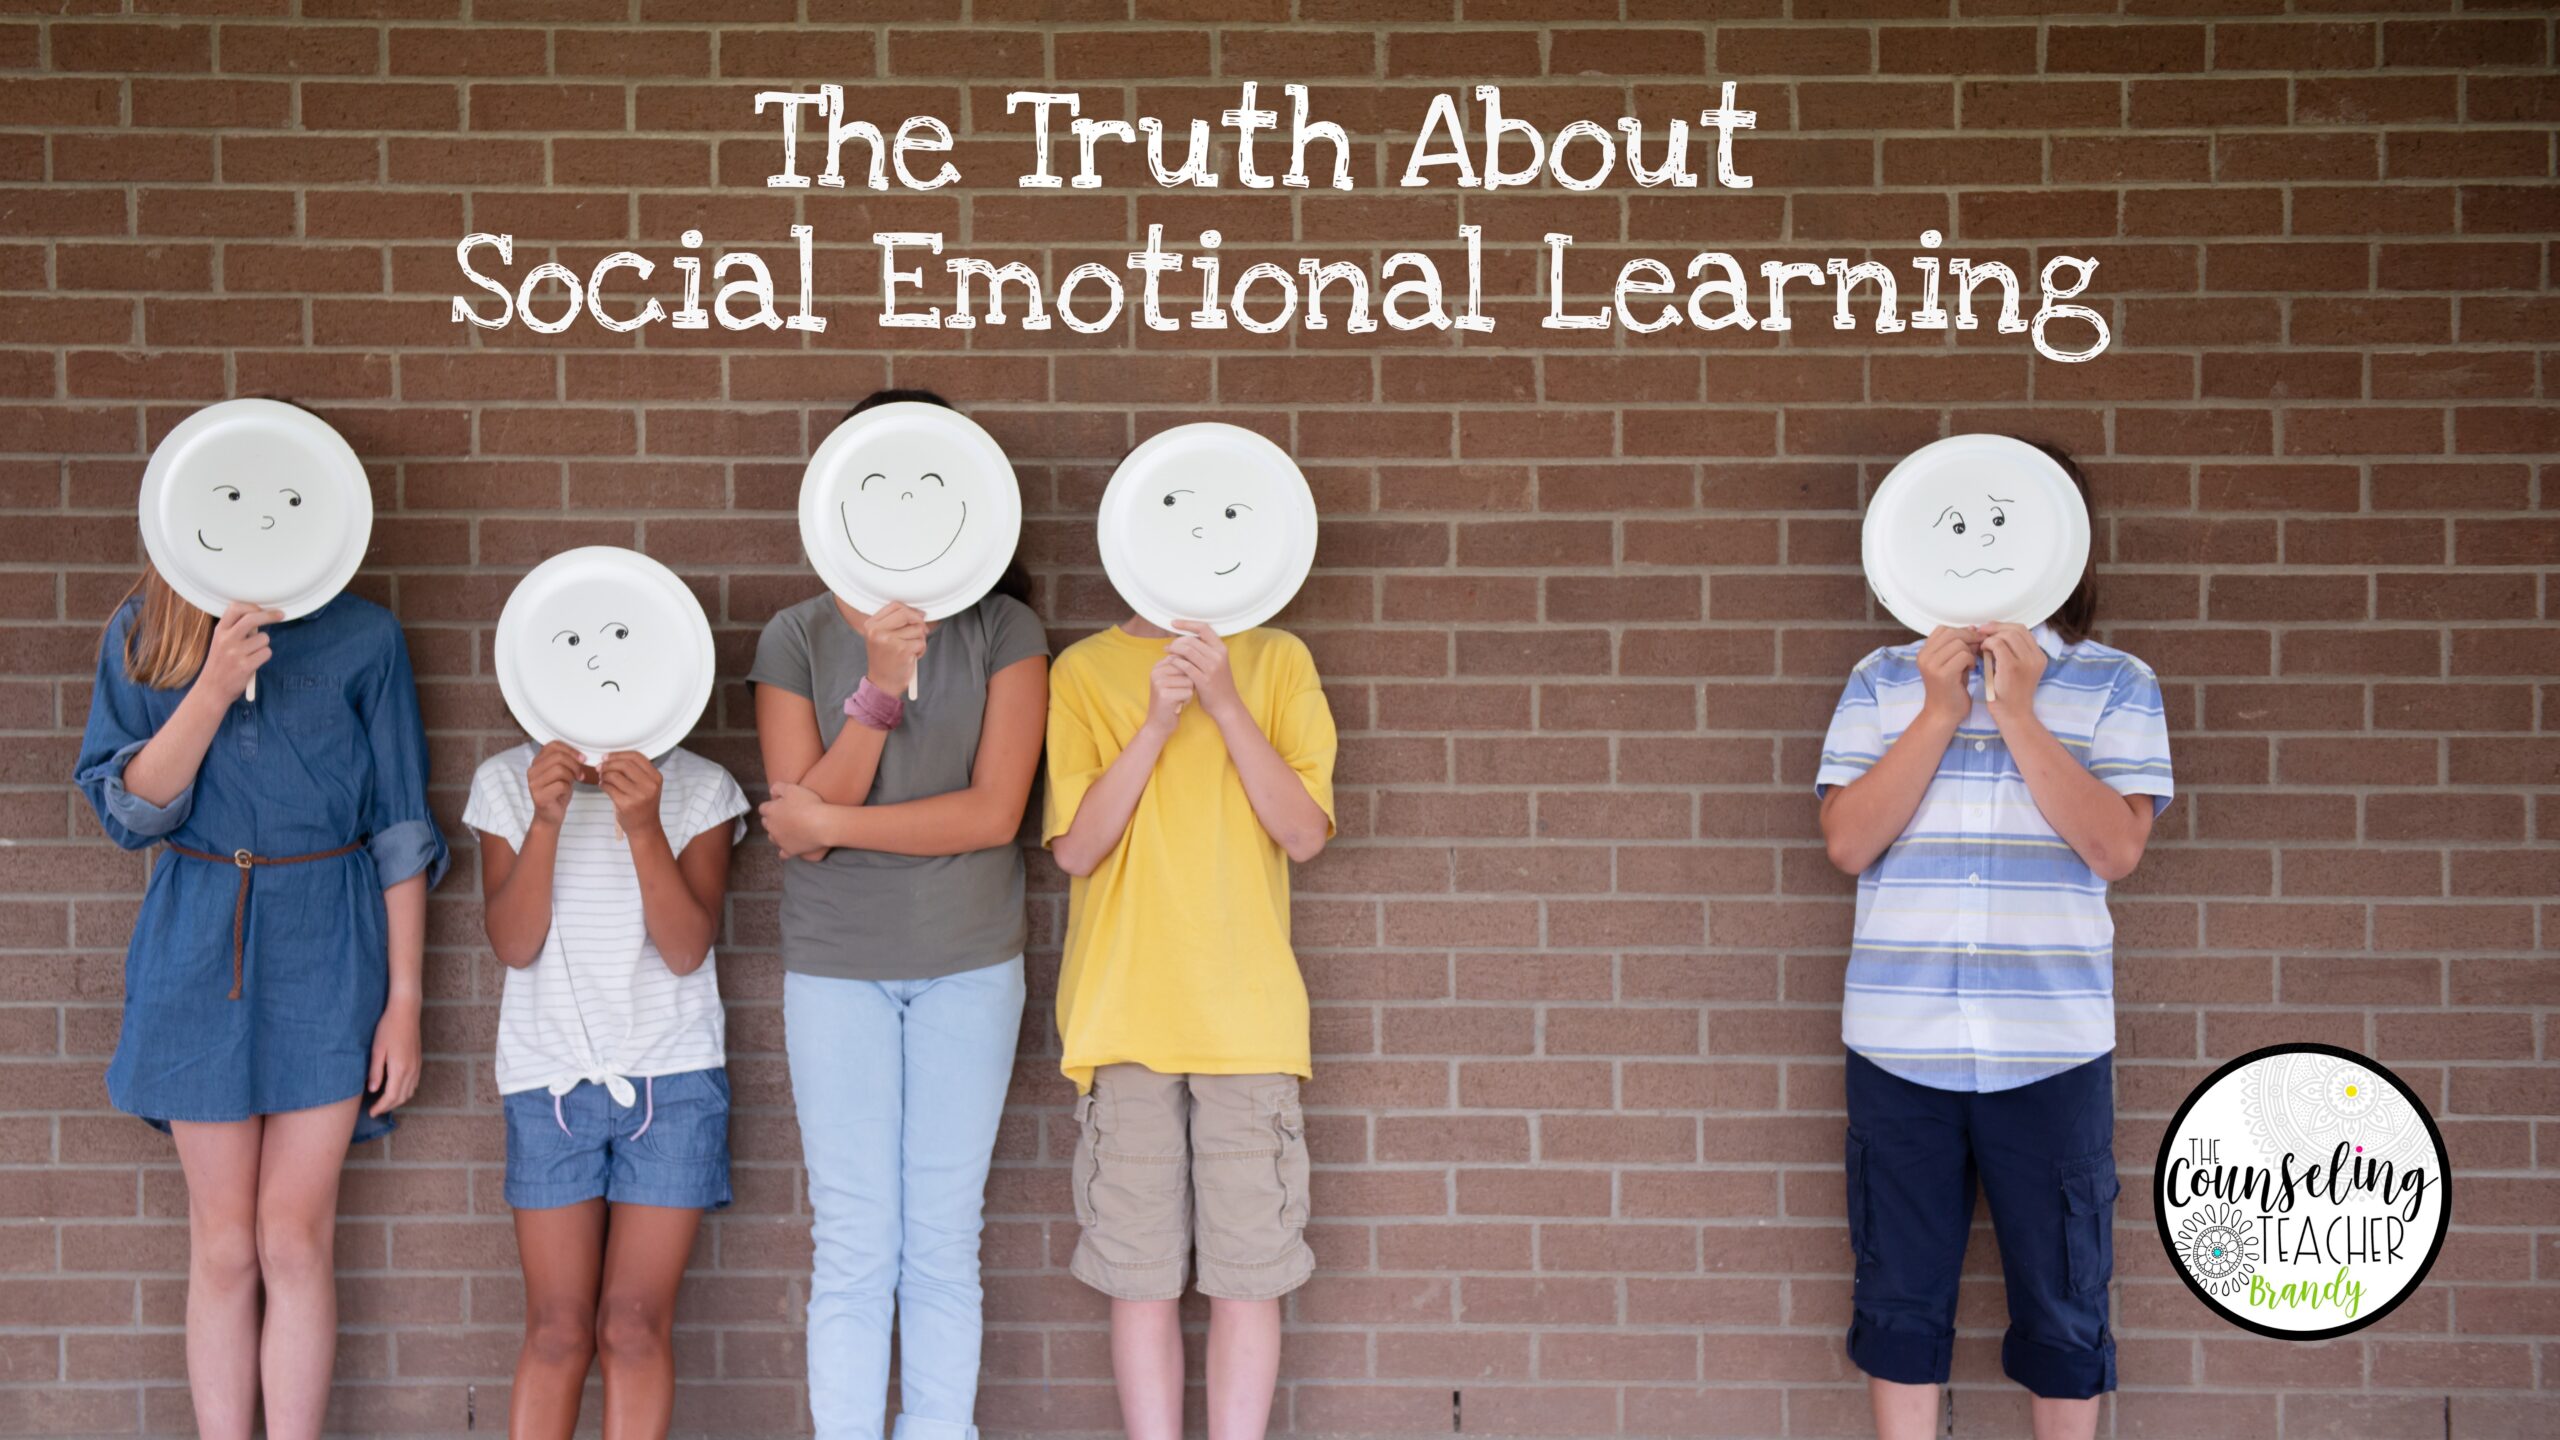 The Truth about Social Emotional Learning